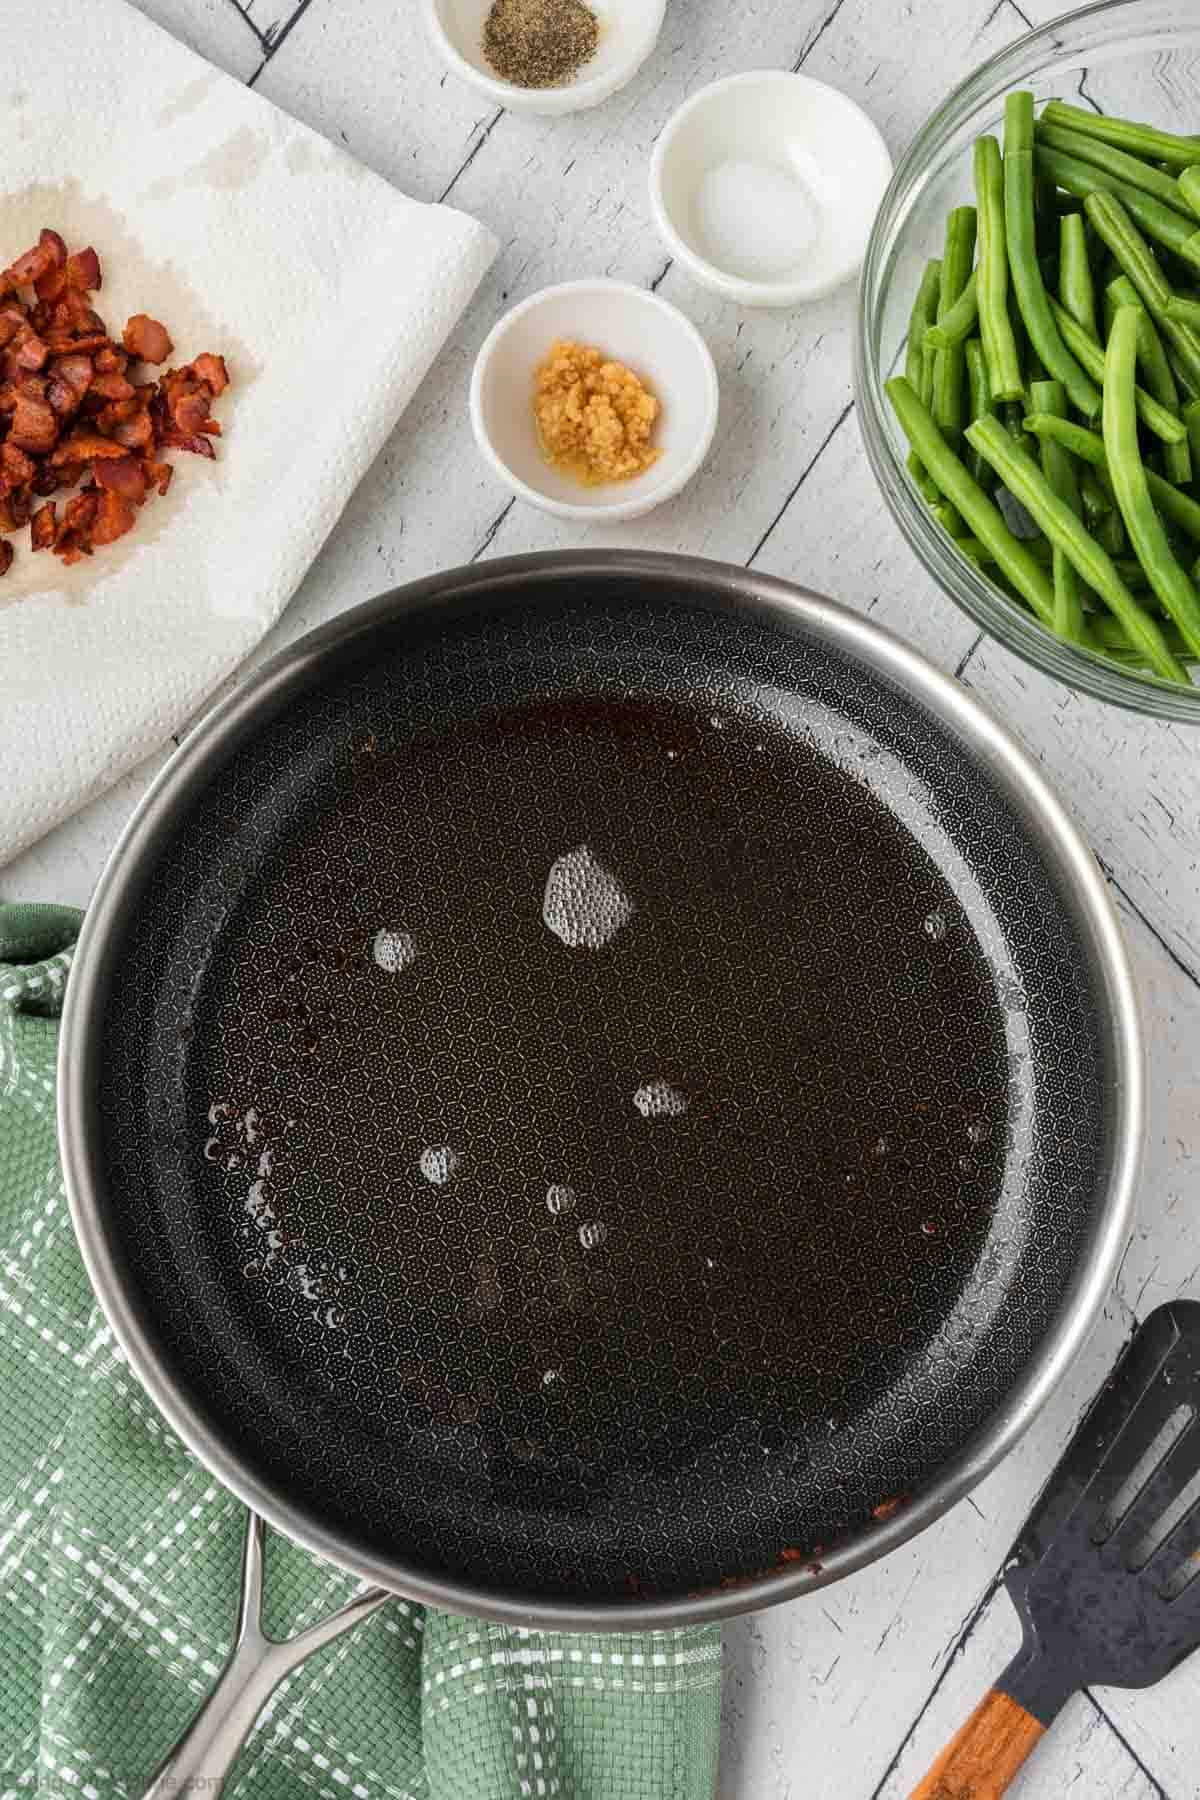 Bacon grease oil in a skillet with small bowls of minced garlic, salt, pepper, and a bowl of fresh green beans and a plate of cooked chopped bacon